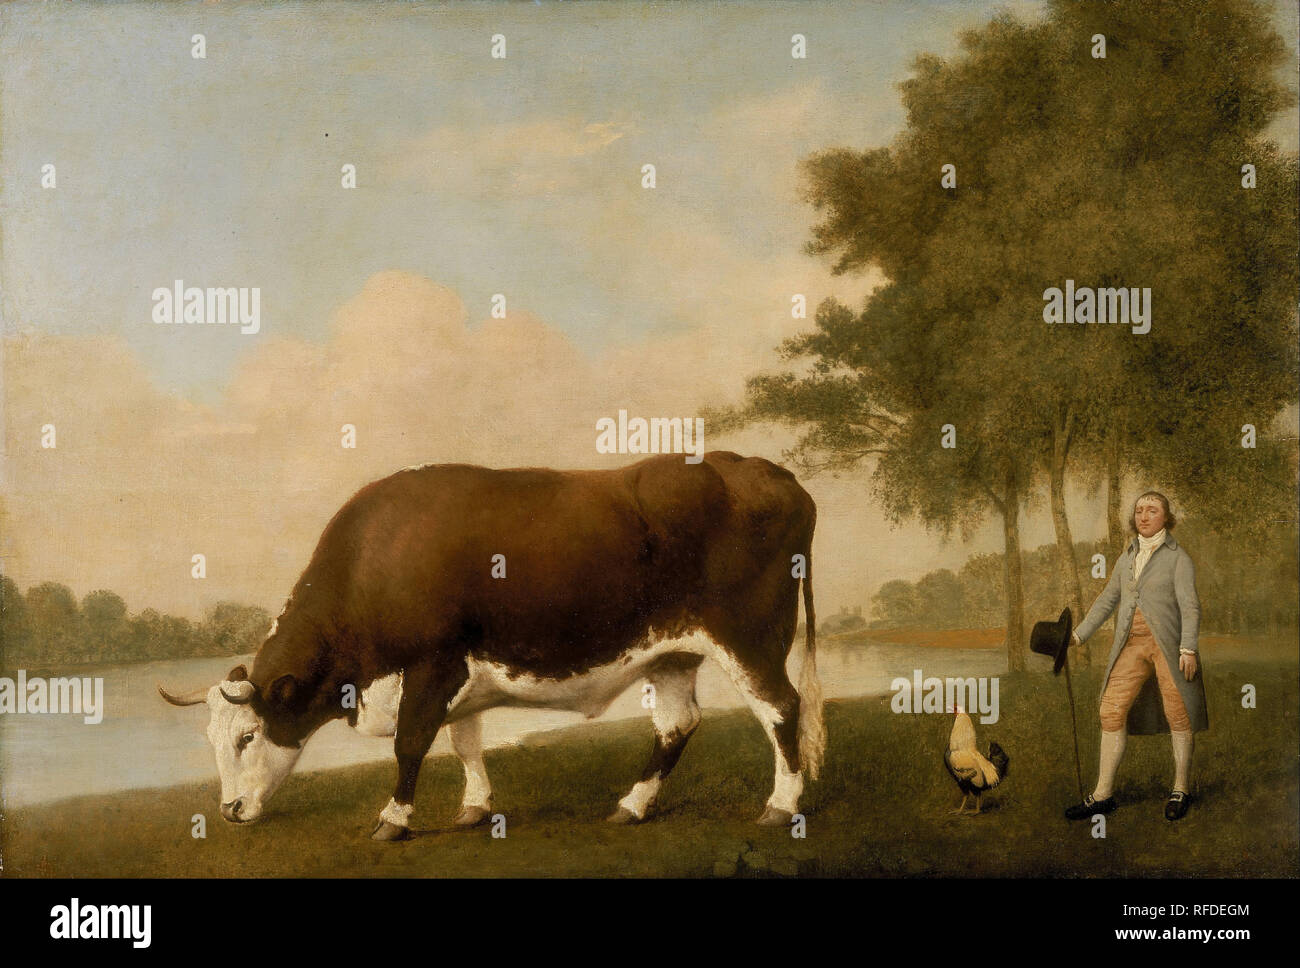 The Lincolnshire Ox. Date/Period: 1790. Painting. Oil on panel. Height: 679 mm (26.73 in); Width: 990 mm (38.97 in). Author: George Stubbs. Stock Photo